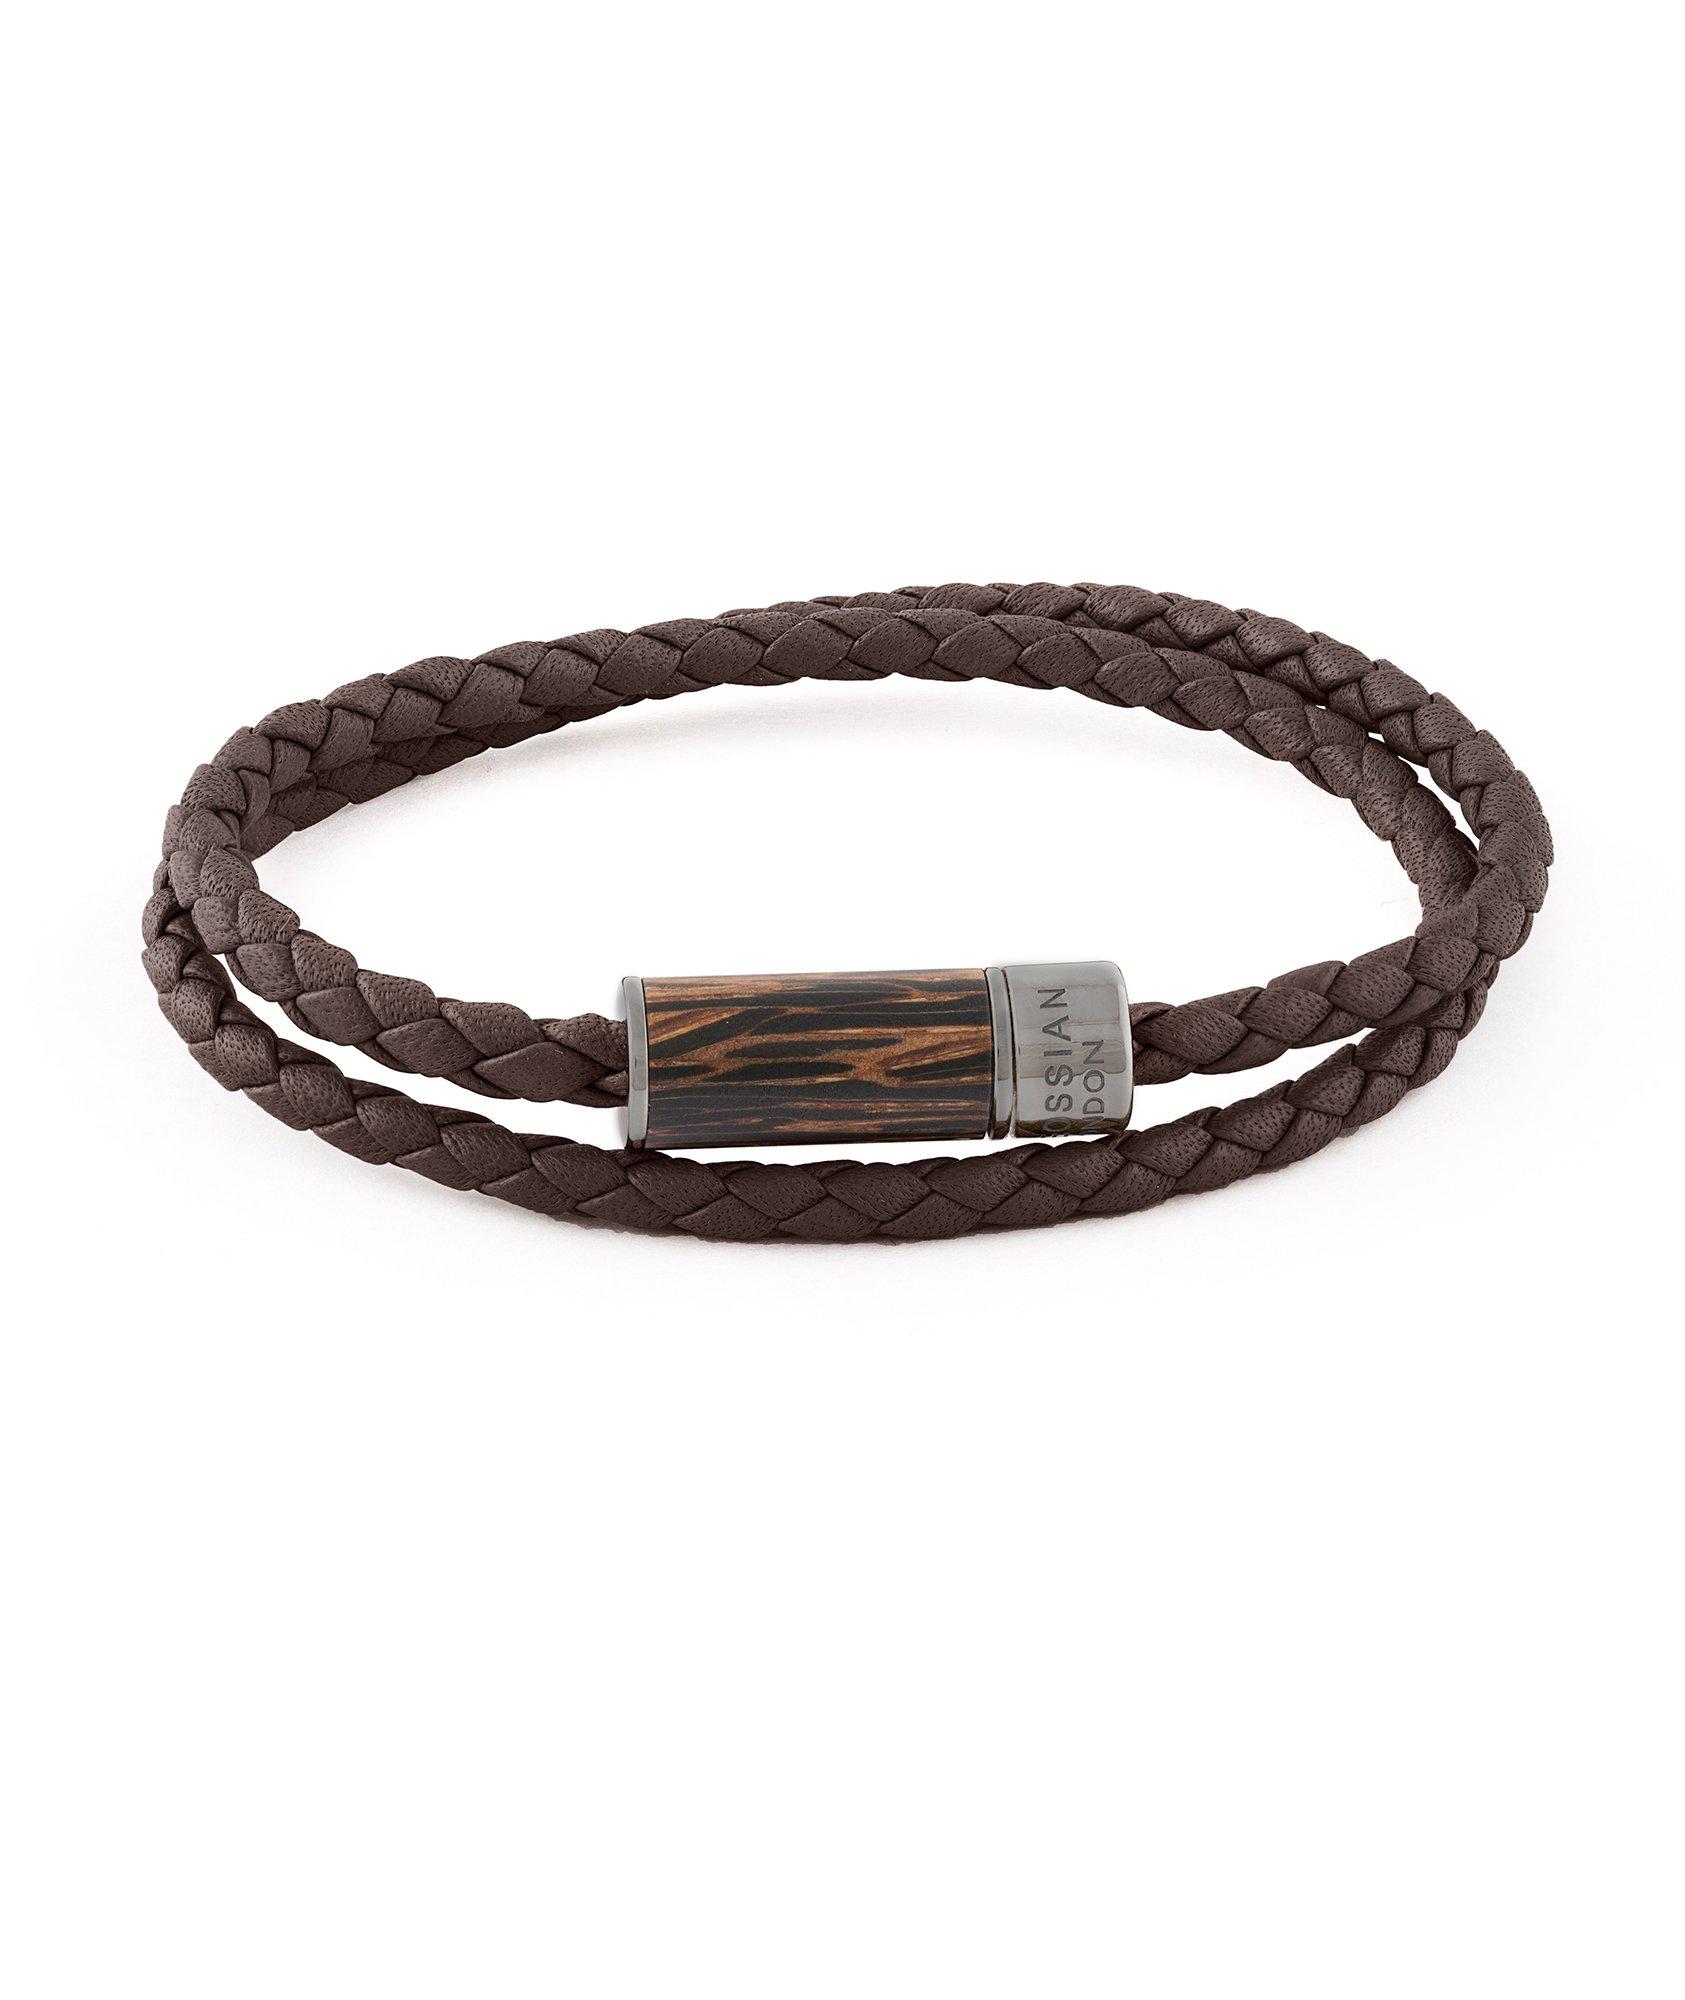 Wooden Clasp Braided Leather Bracelet  image 0